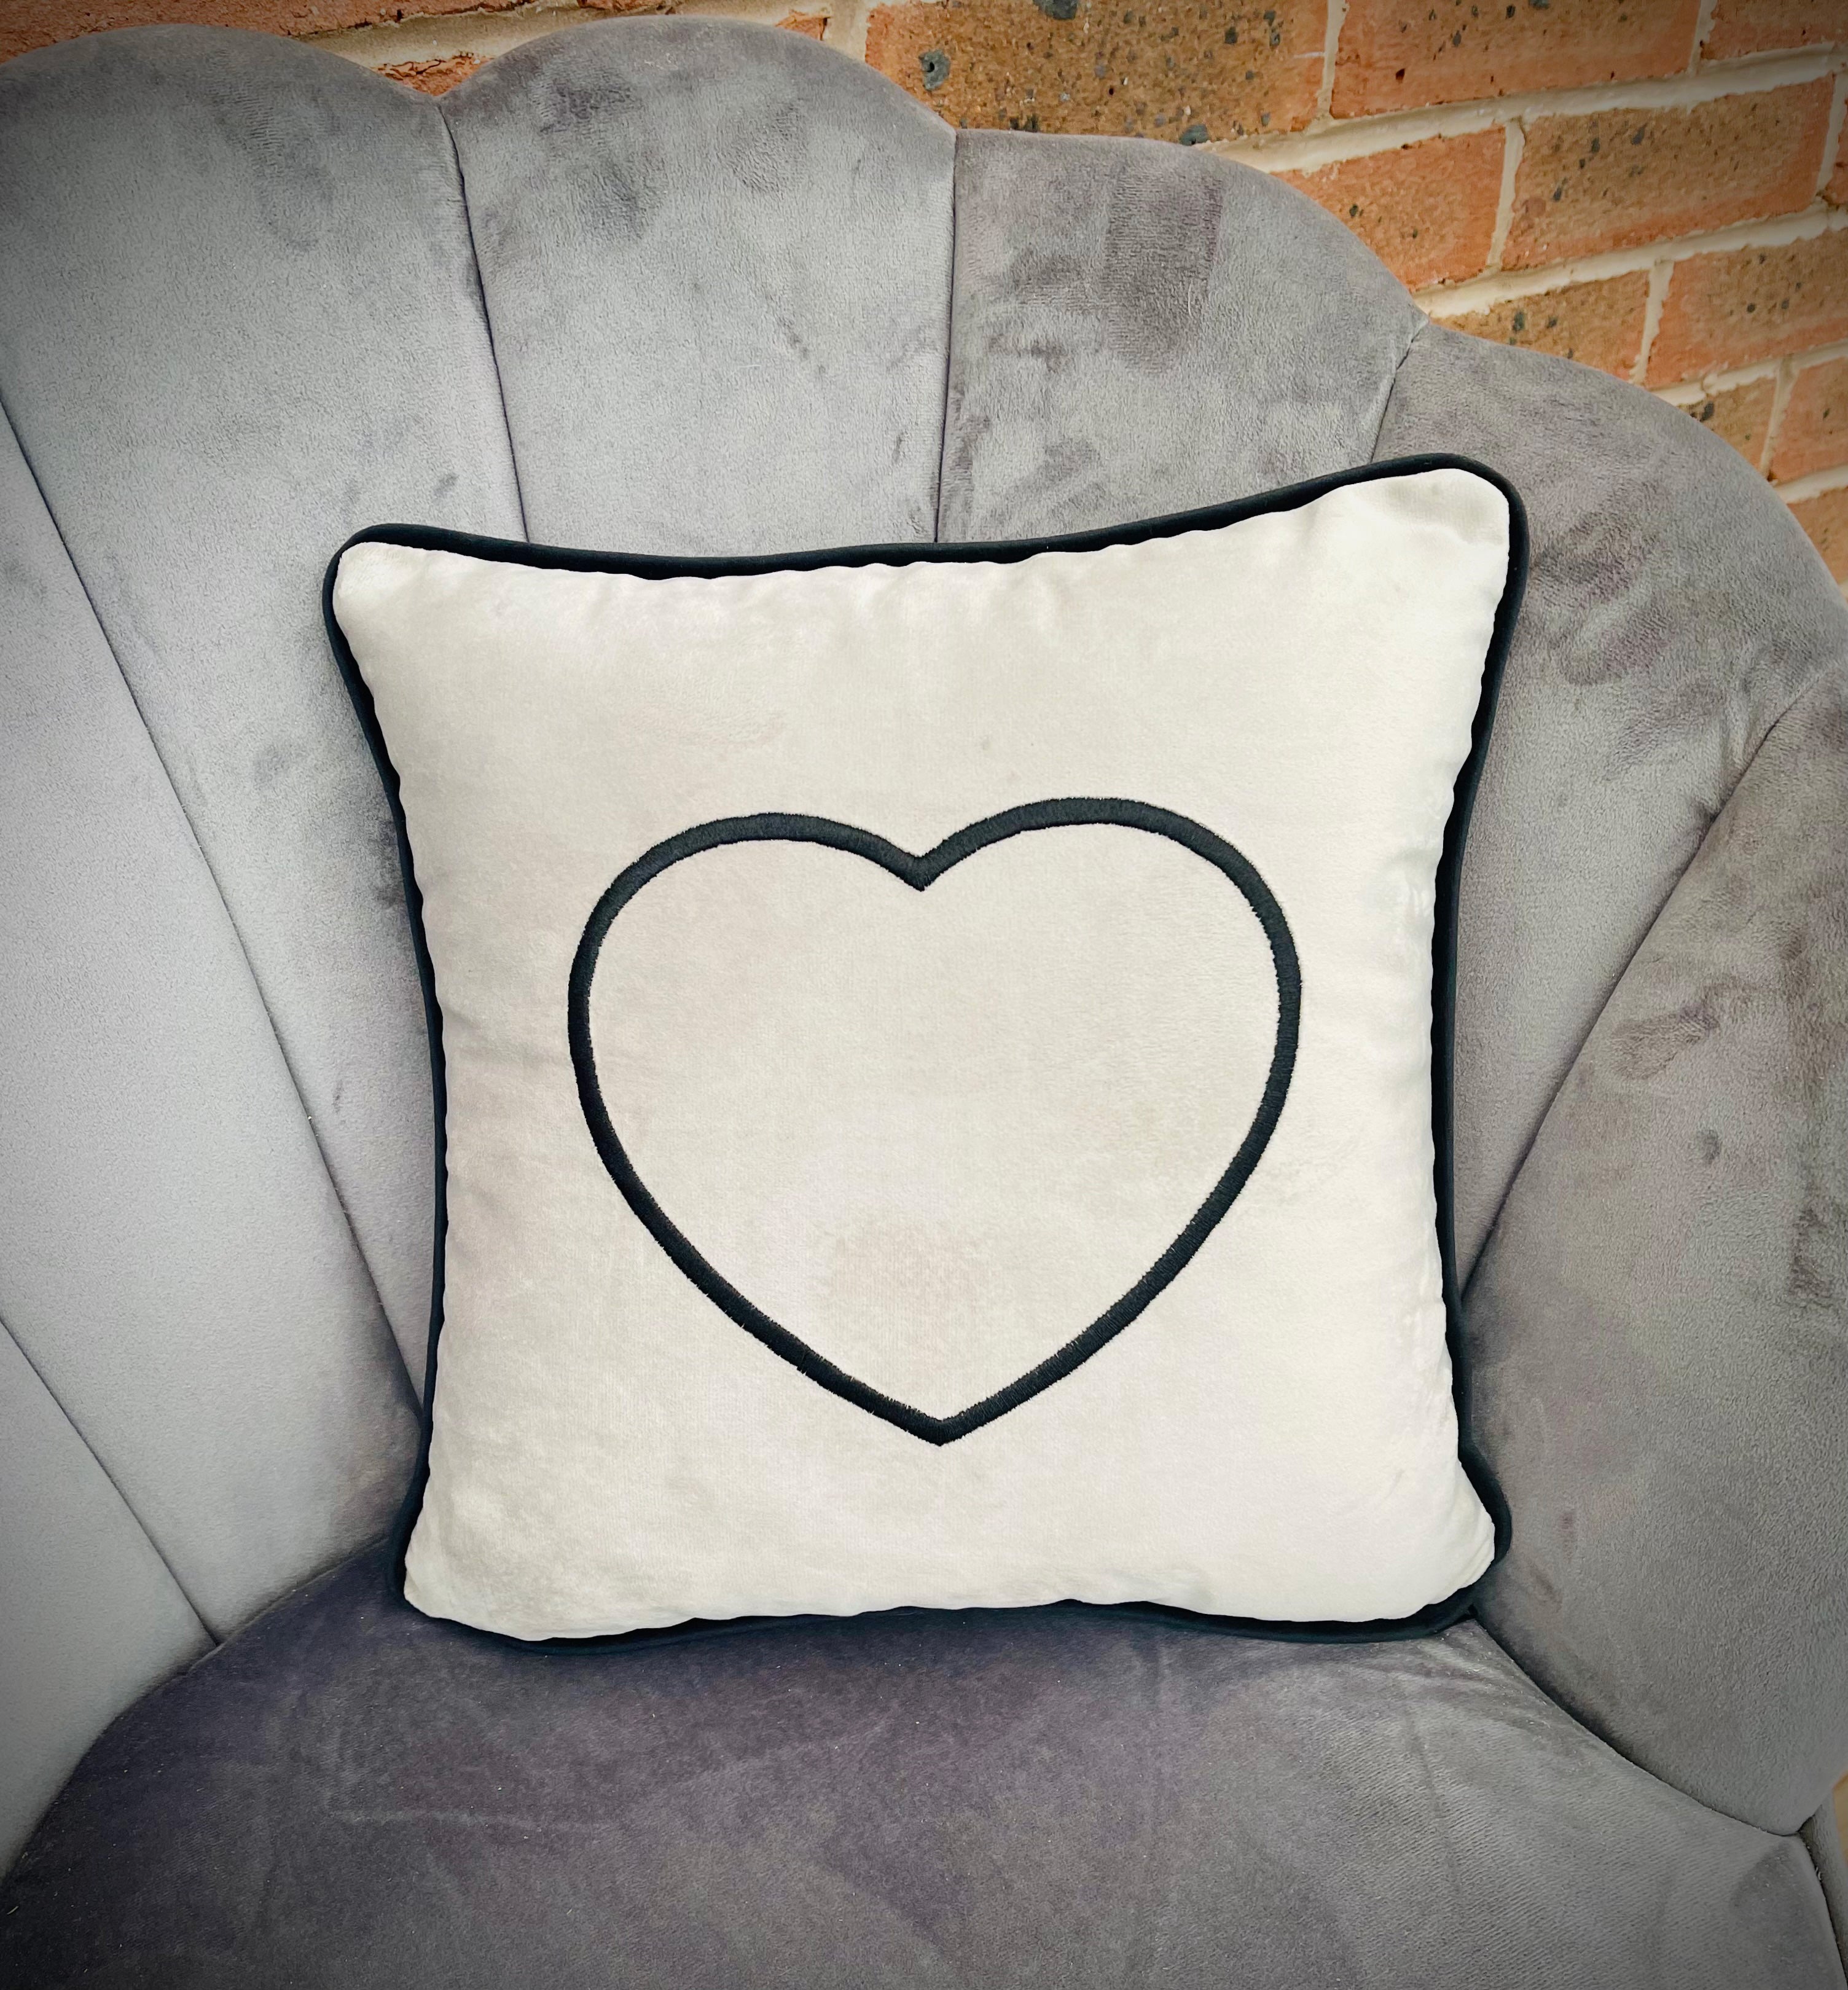 Personalised Cushion for Dog or Cat - Heart design grey with white text- Pet Cushions- Home Interior Cushions- Personalised Cushion for Dogs- Personalised Home Cushions